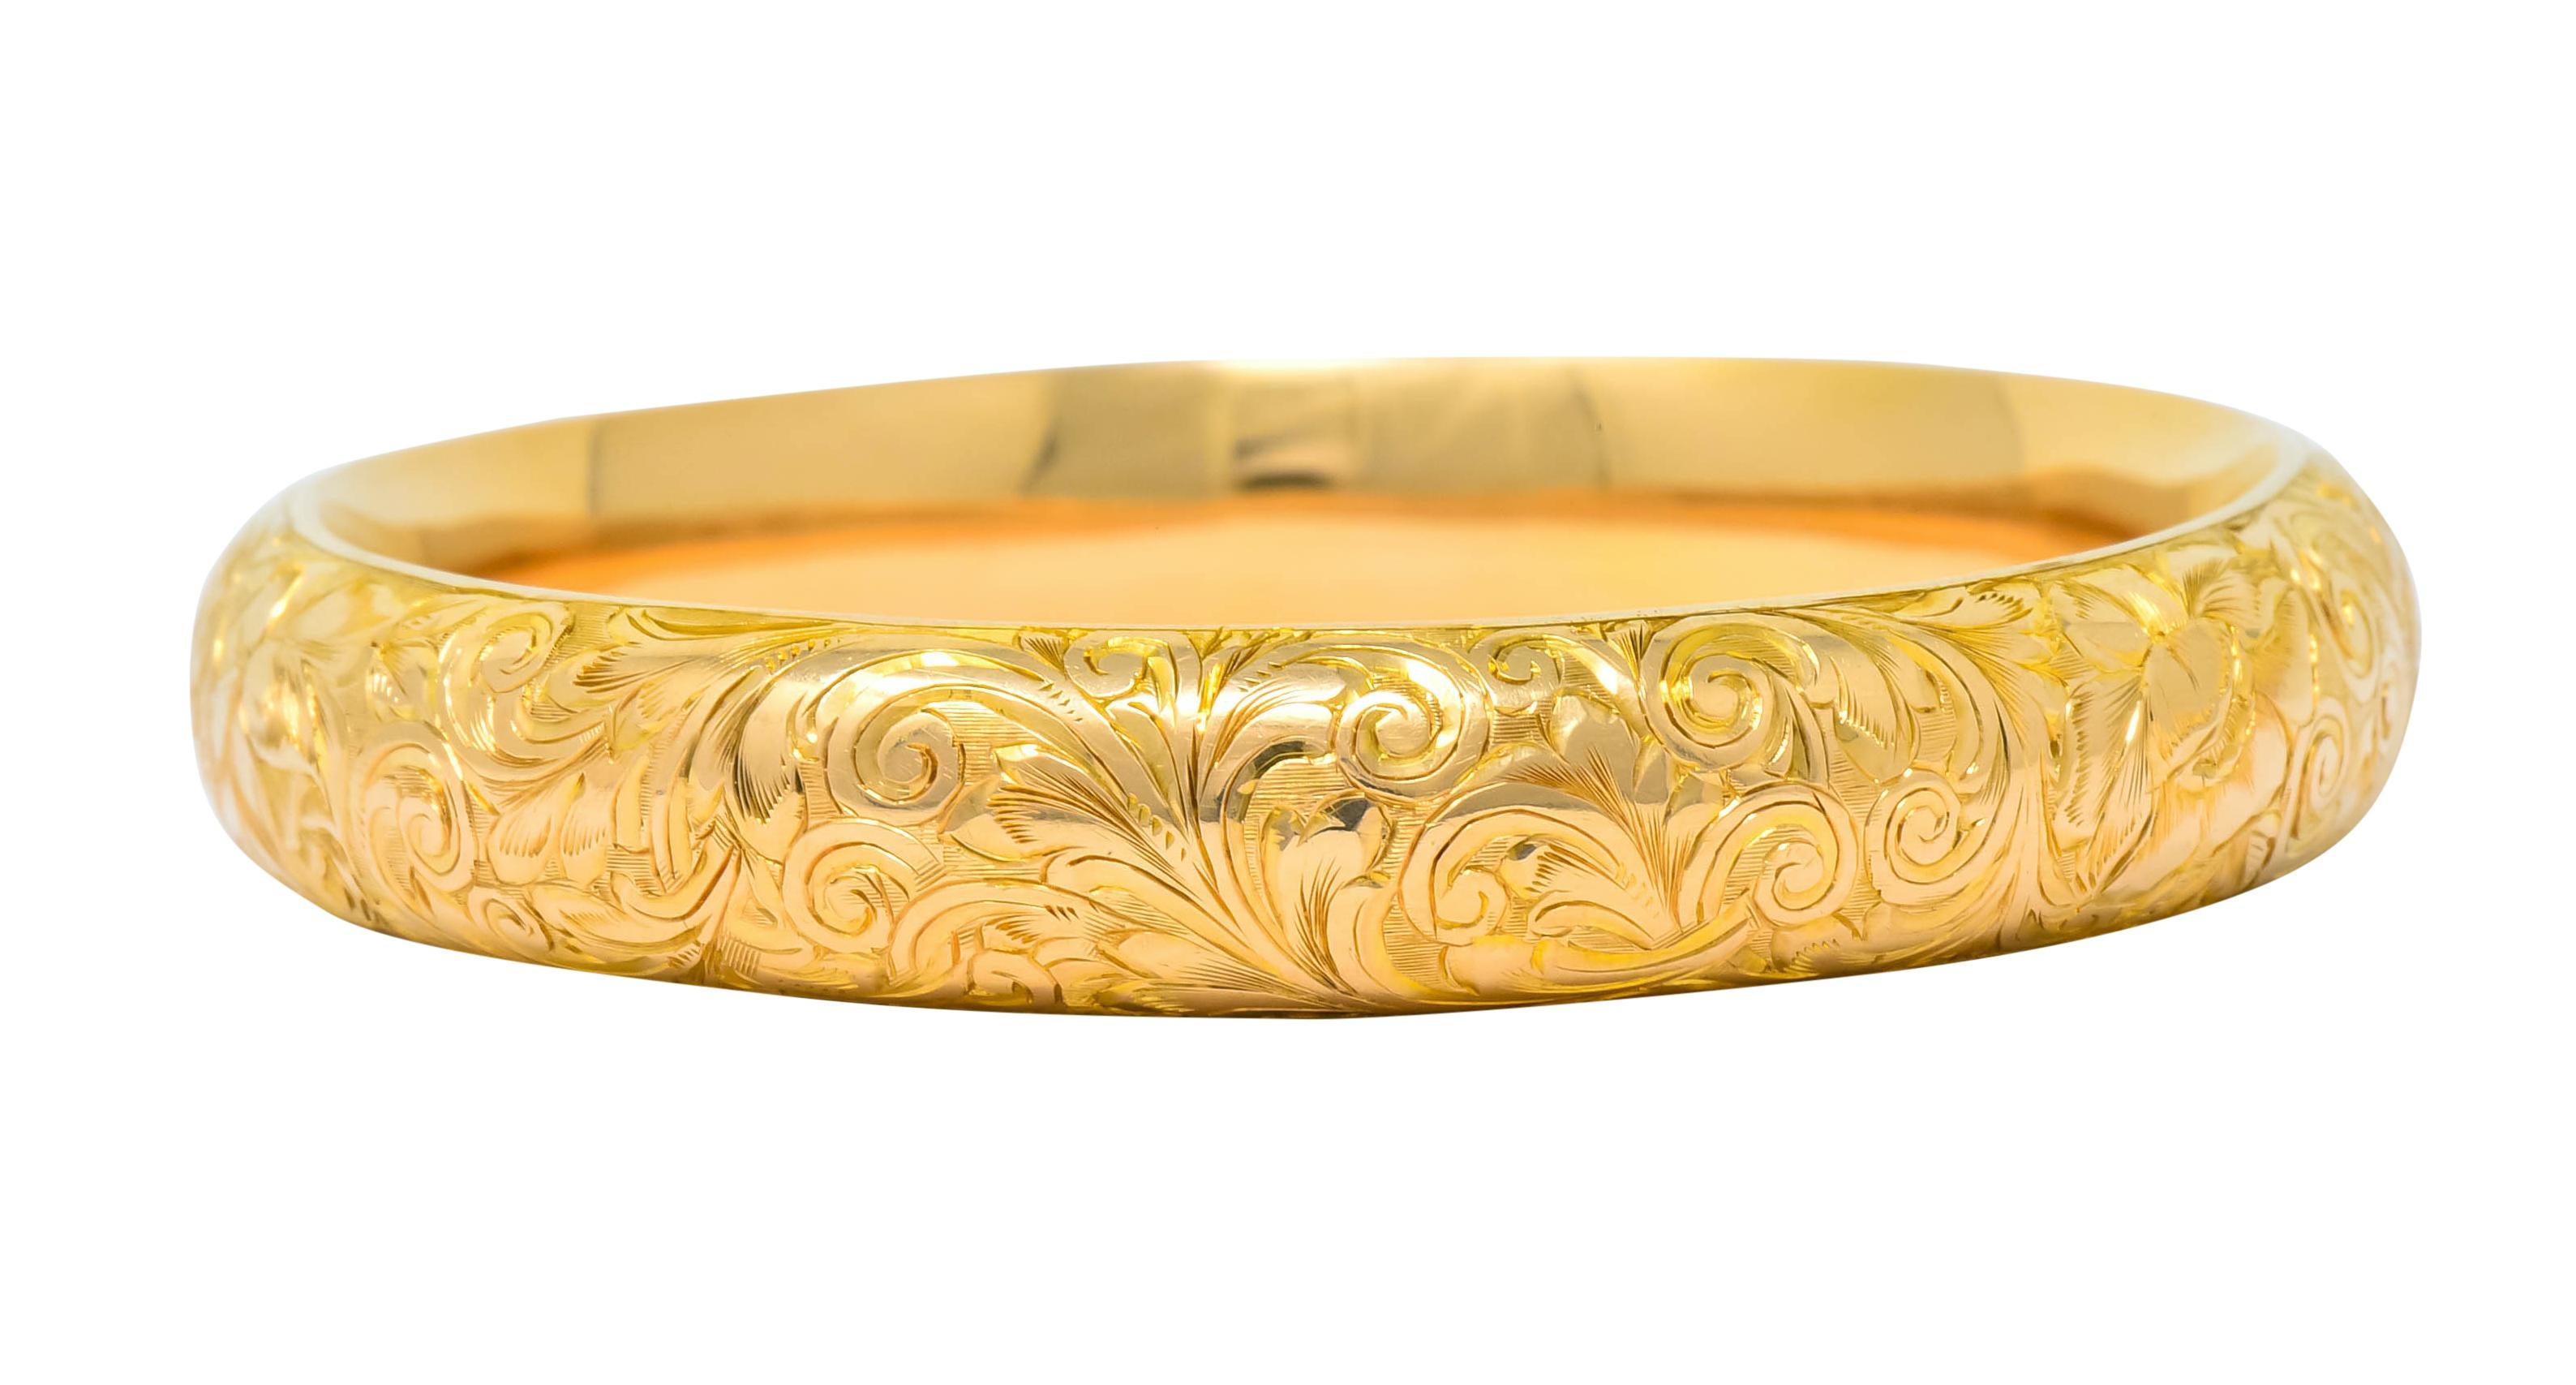 Designed as bangle style bracelet engraved with a blossoming foliate motif

With makers mark for Riker Brothers

Stamped 14k for 14 karat gold

Circa 1900

Inner circumference: 7 inches

Width: 1/2 inch

Total weight: 19.6 grams

Refined. Blooming.